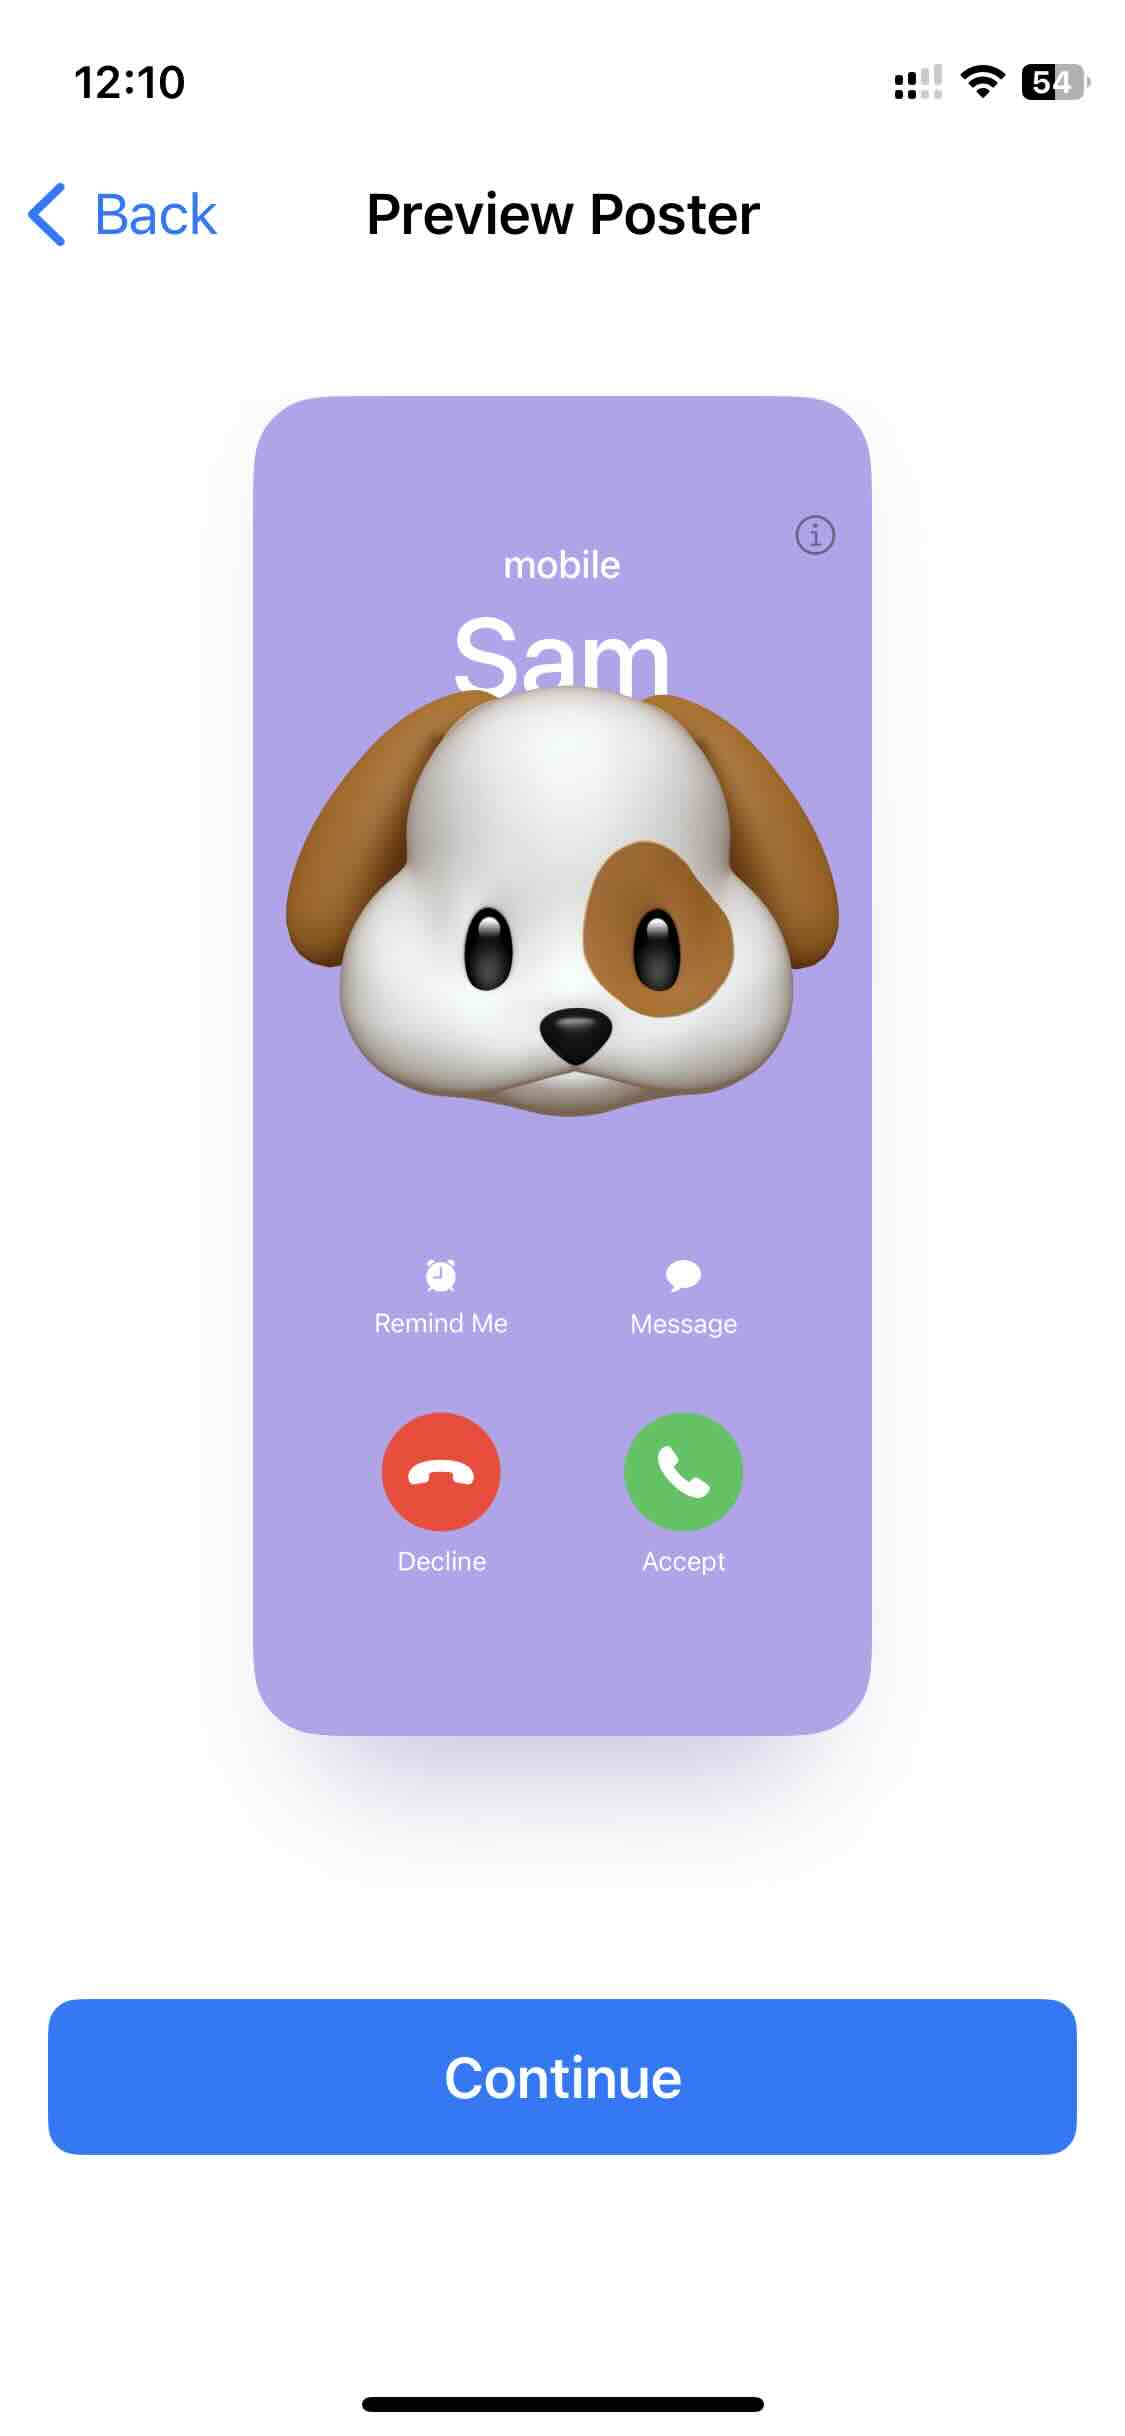 7 - Preview Contact Poster on iOS 17